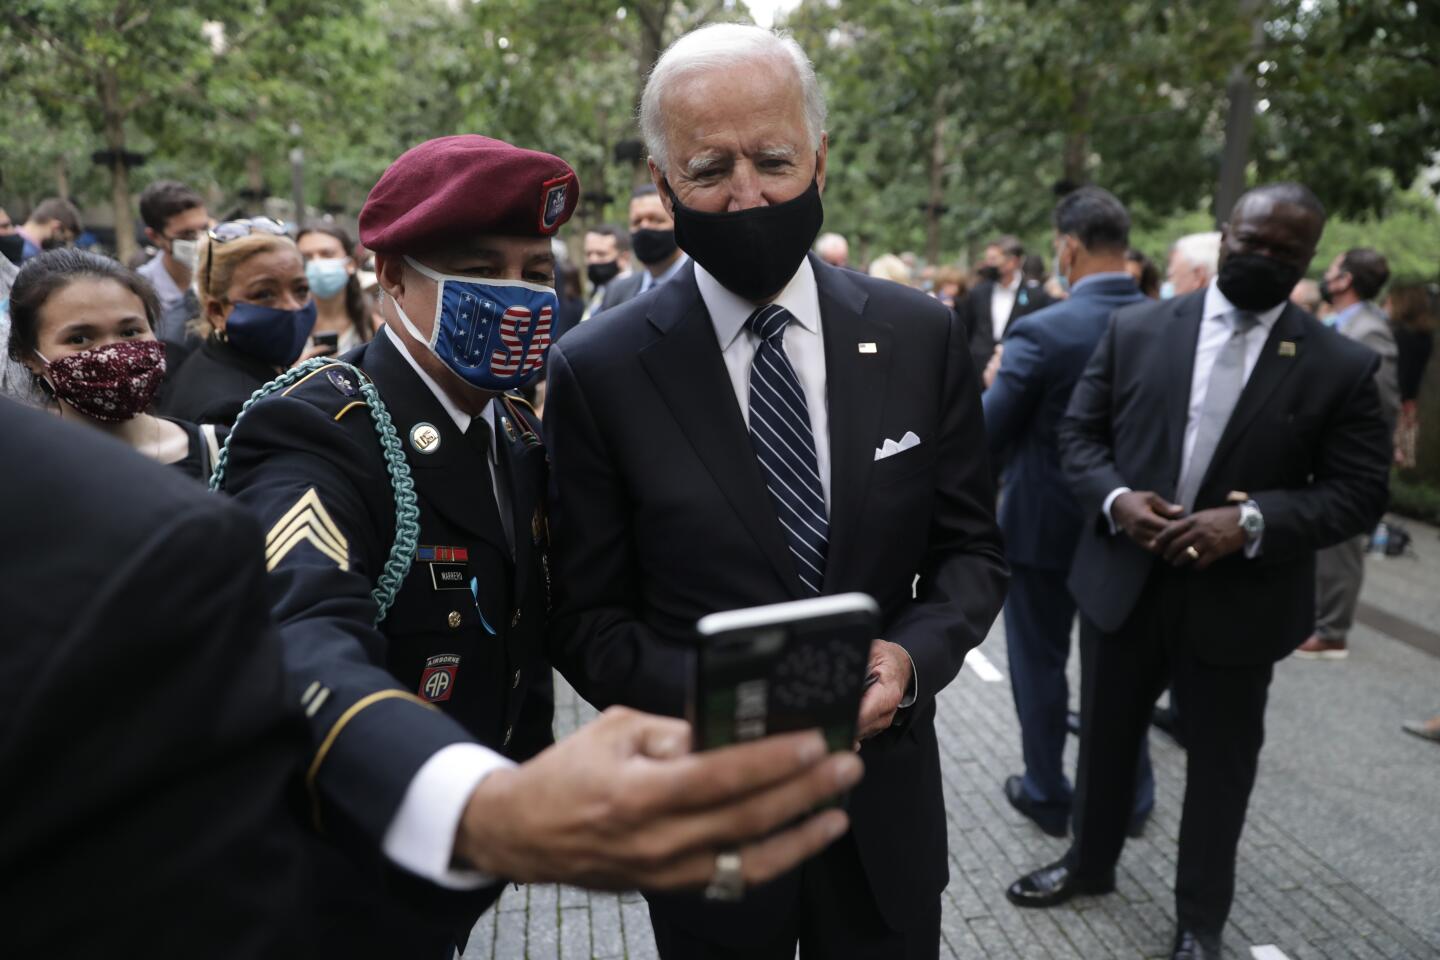 Joe Biden pauses for a photo with a person in uniform at the National September 11 Memorial in New York.